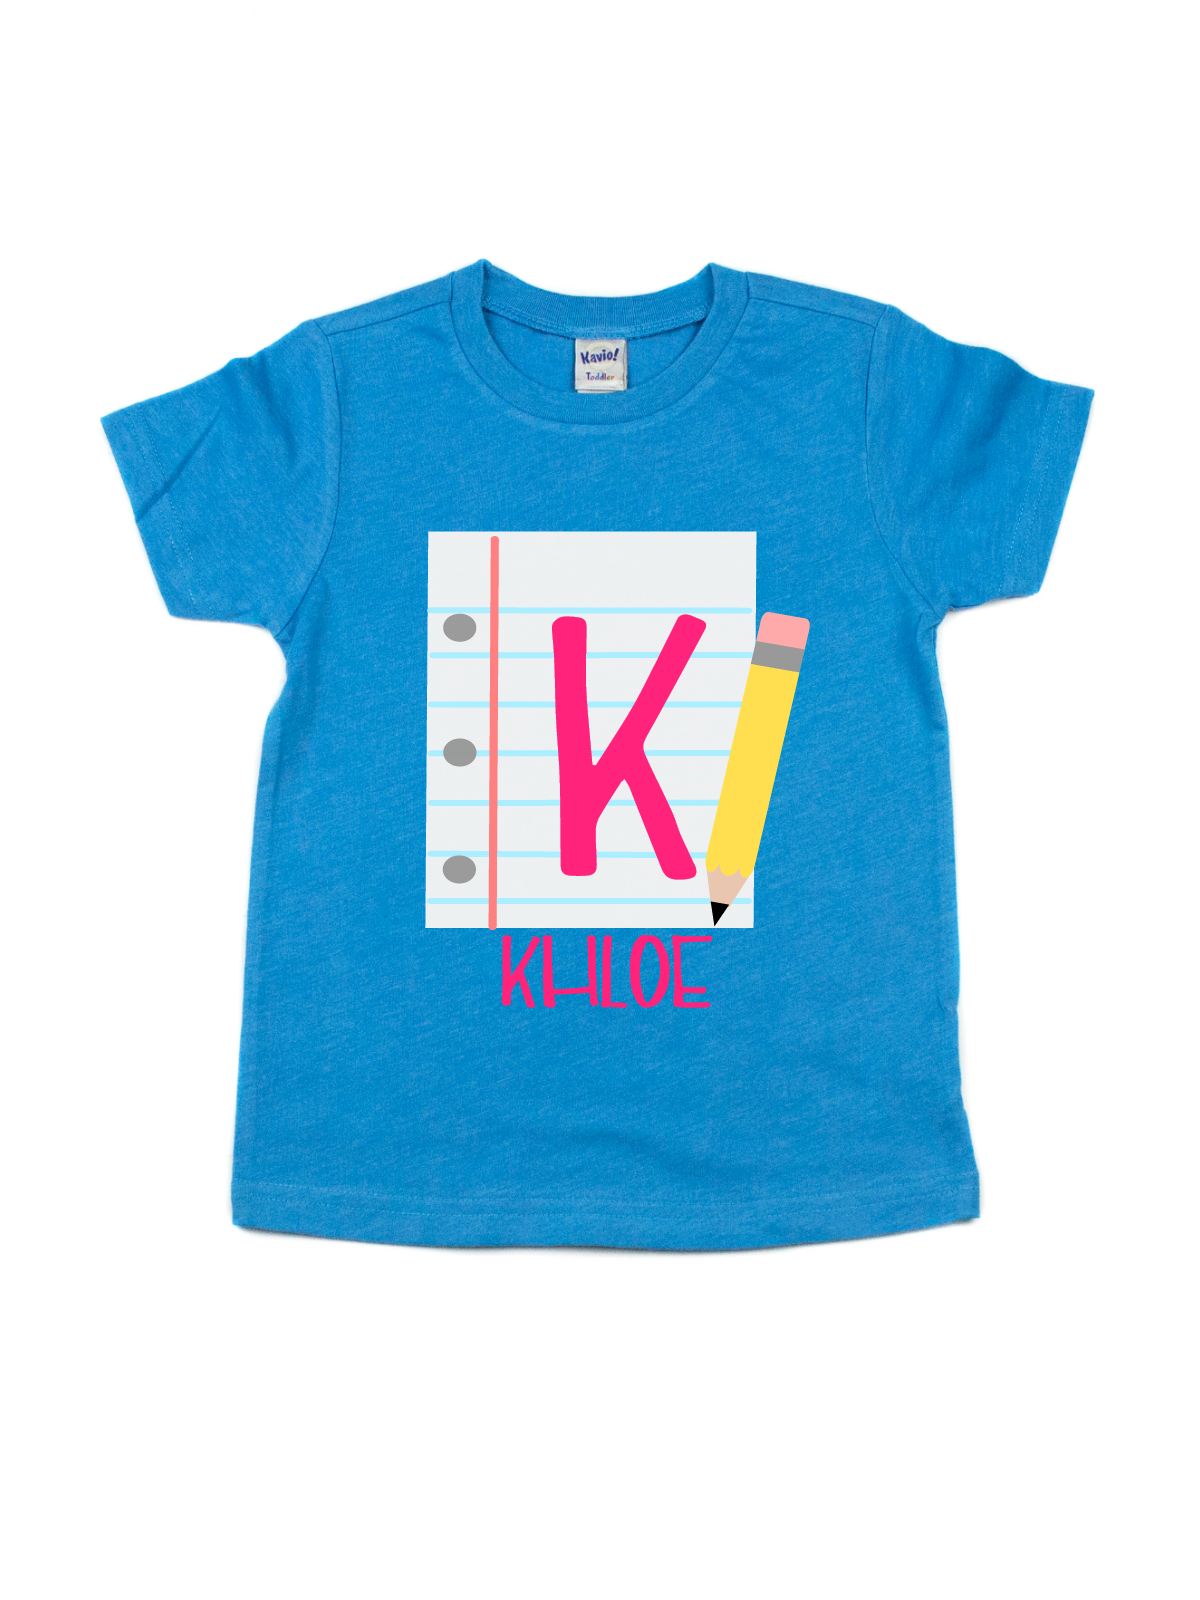 kids first day of school personalized shirt